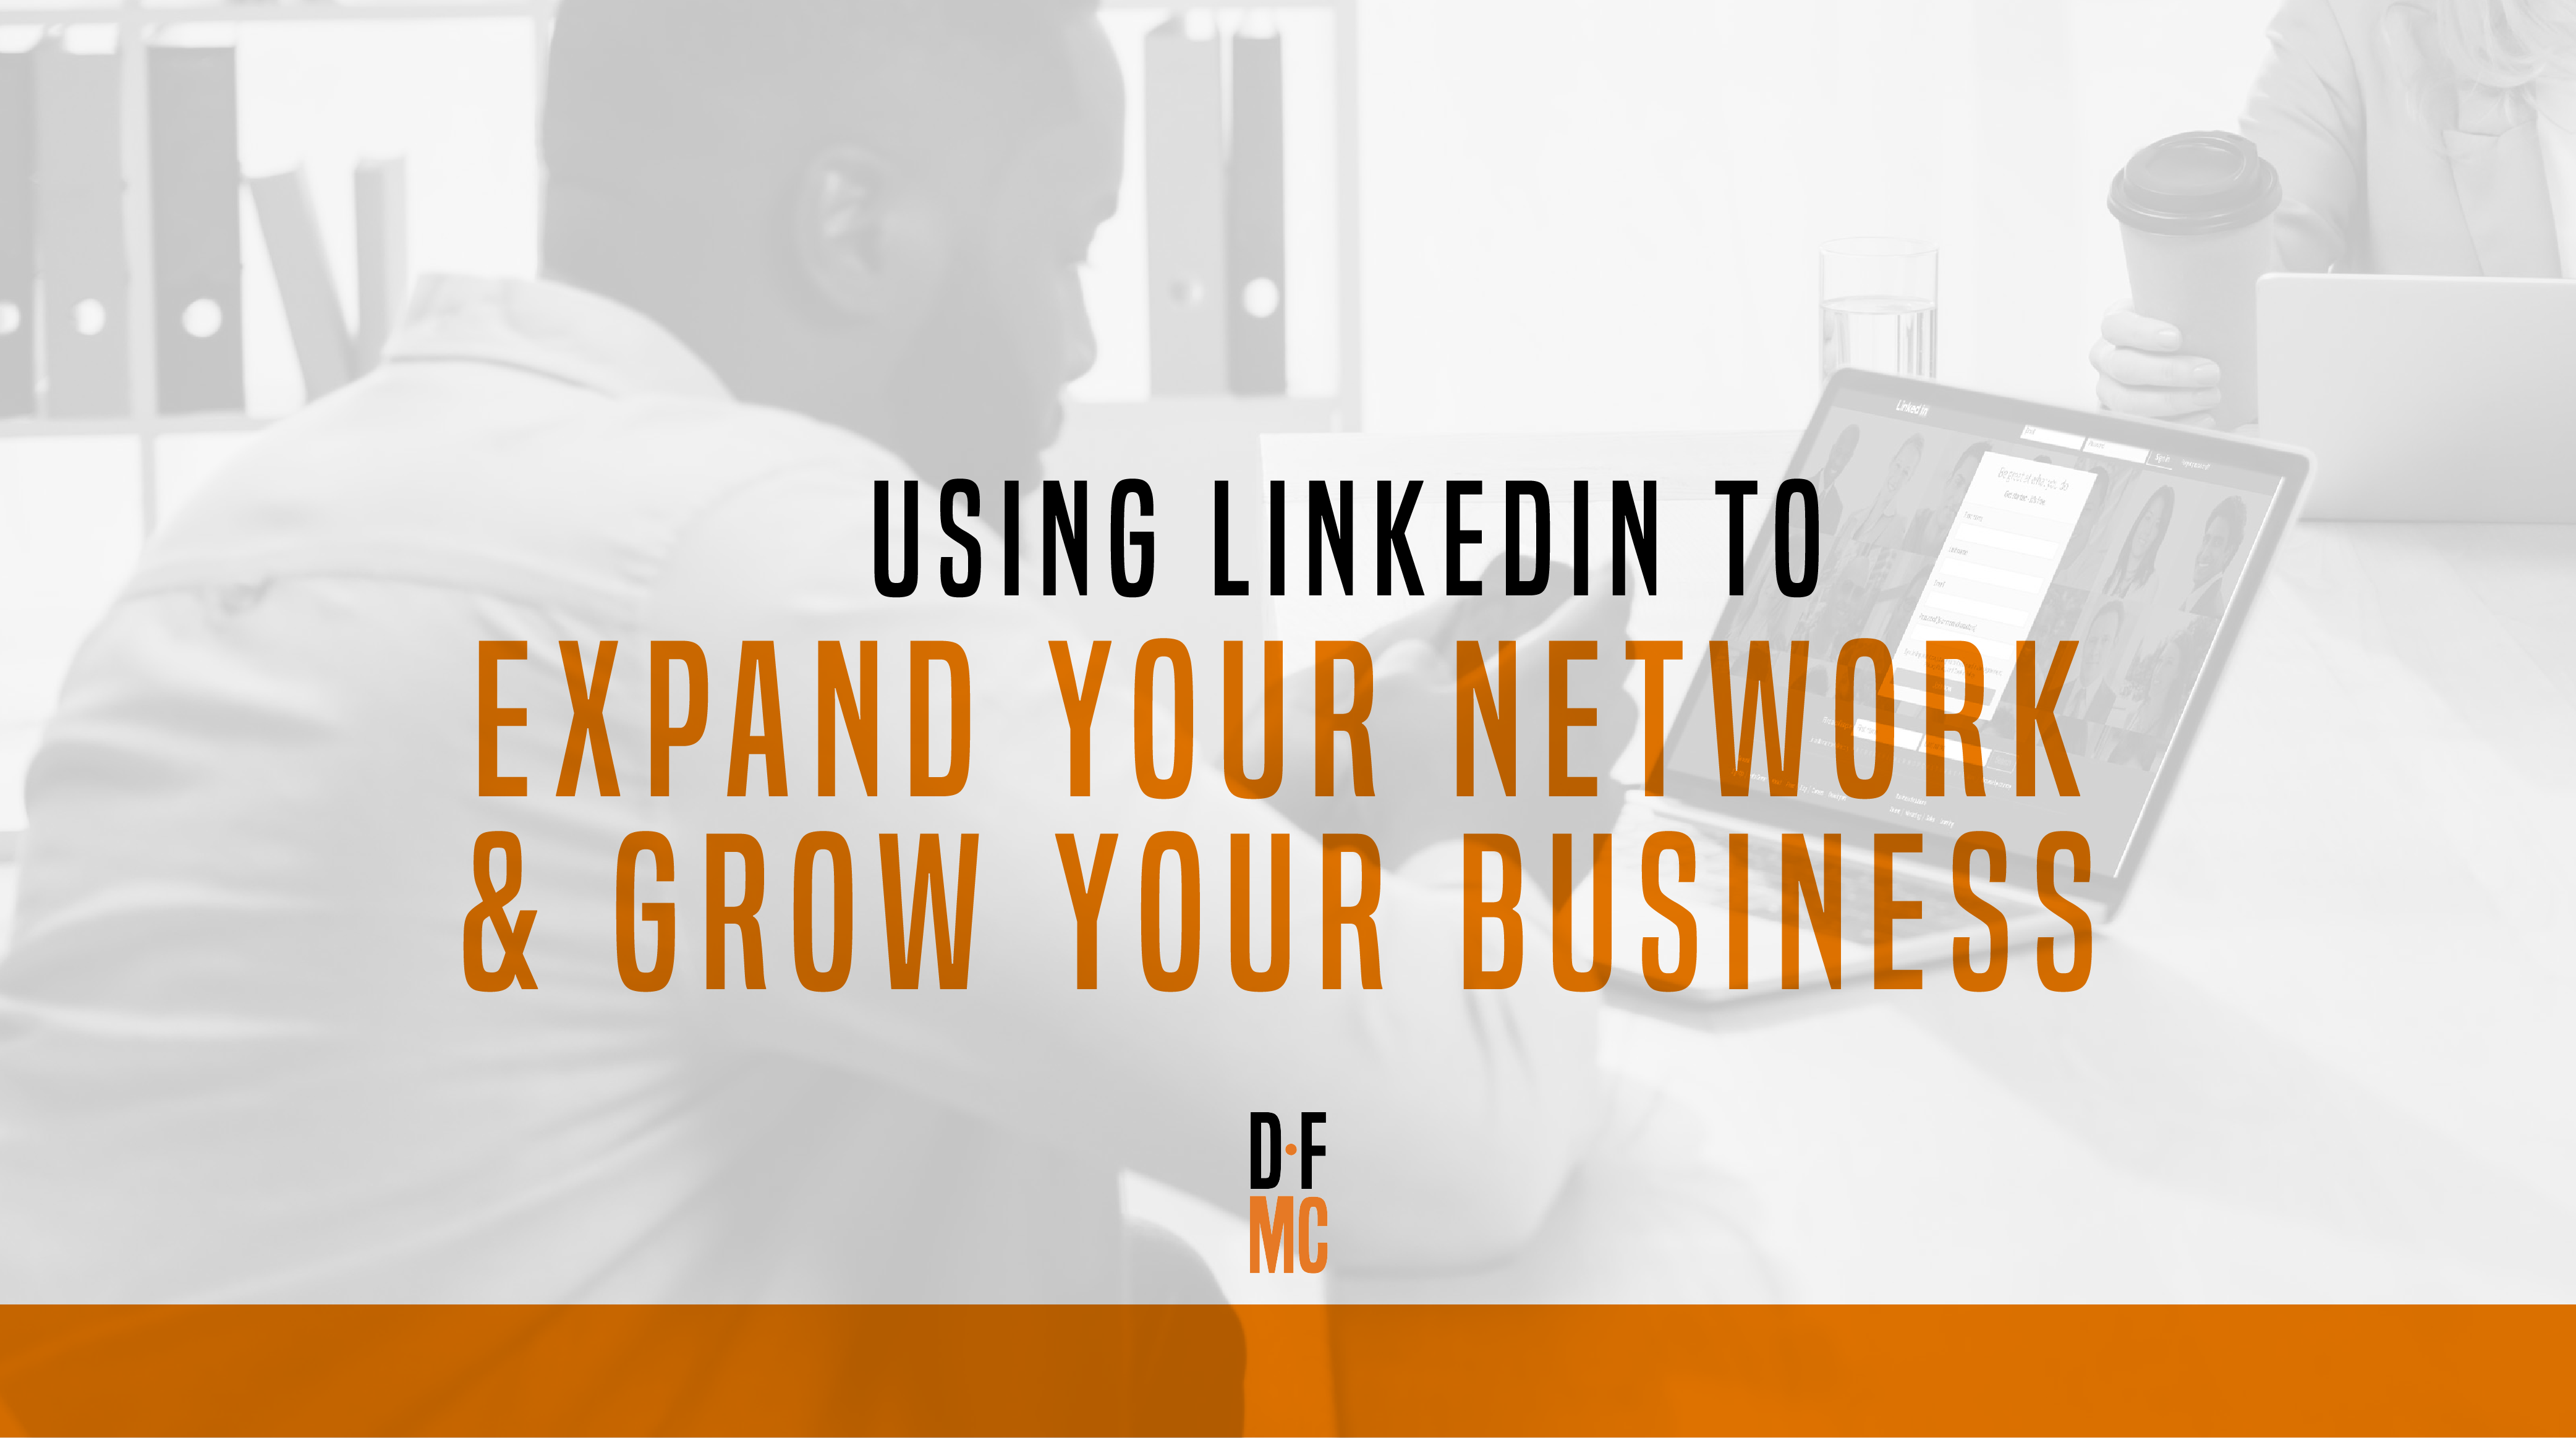 Using LinkedIn to expand your network and grow your business